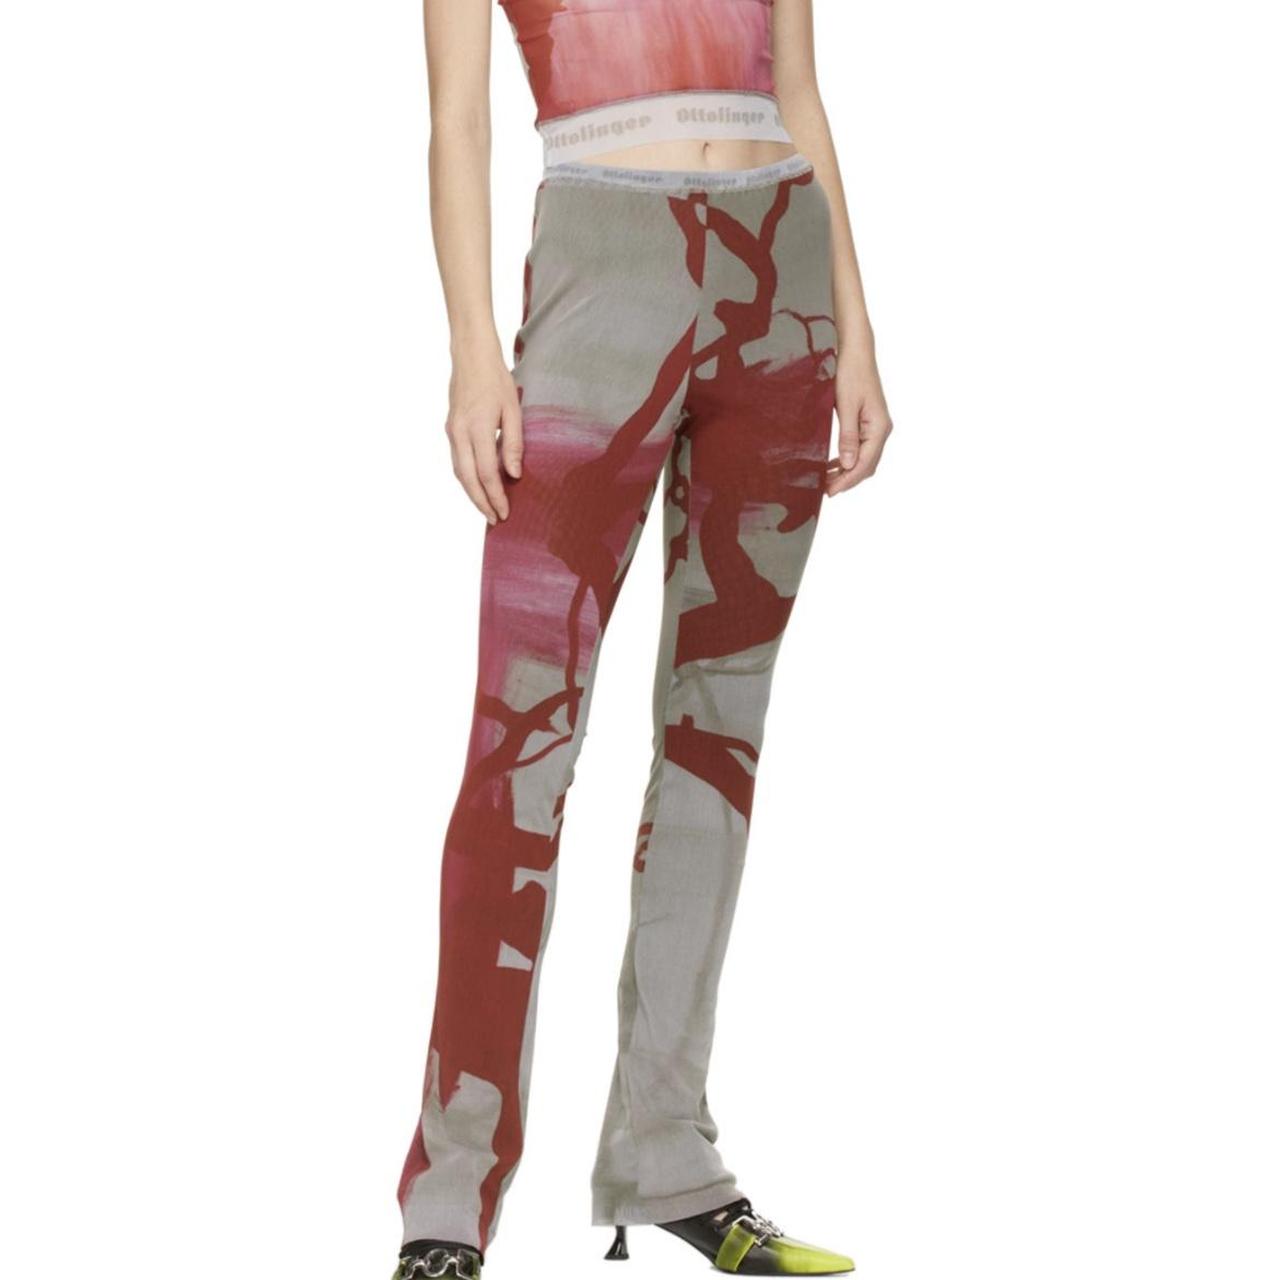 Product Image 1 - Ottolinger pants and top set